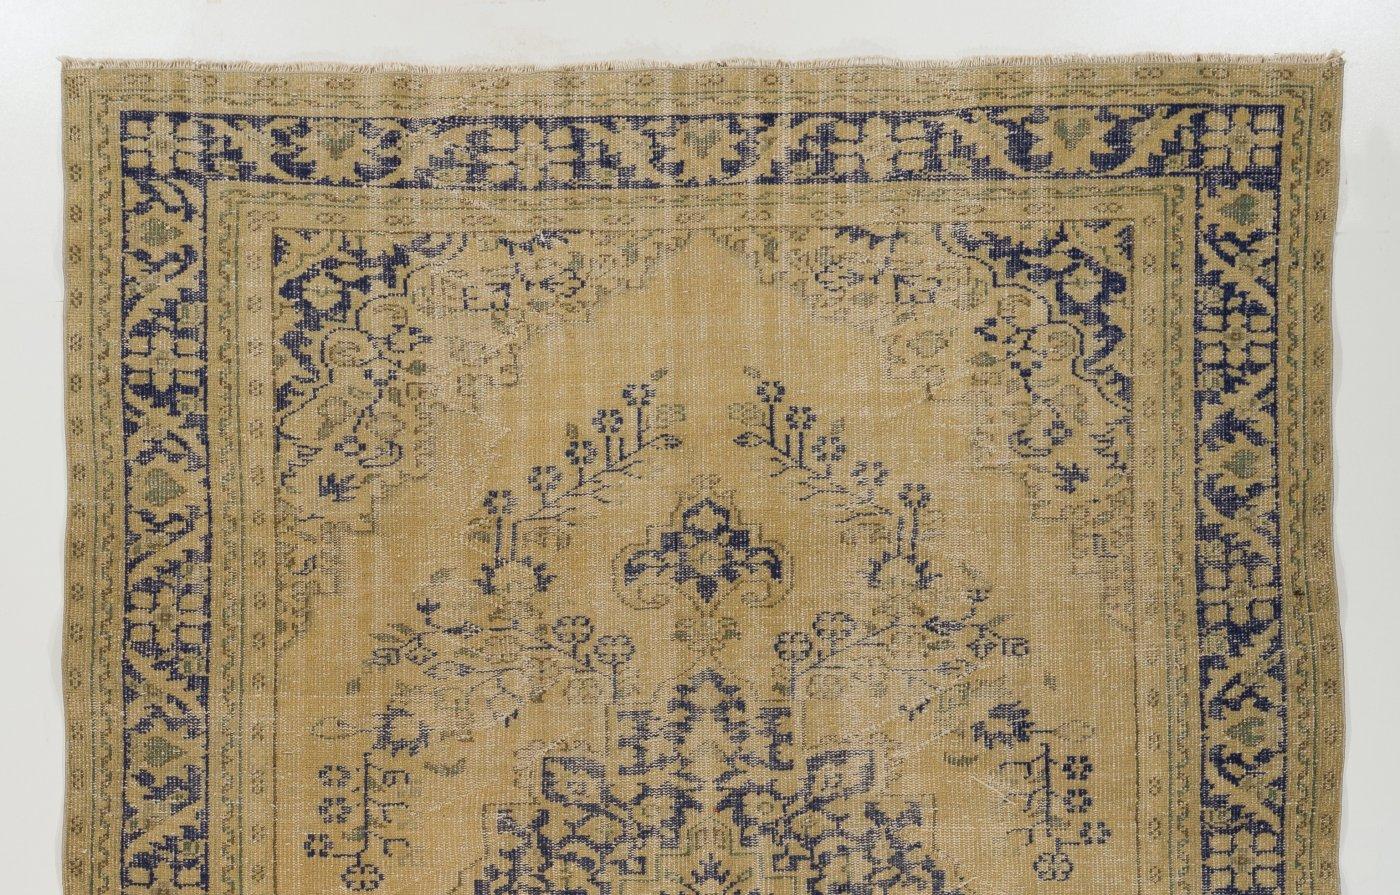 A vintage handmade Turkish Oushak area rug with a delicate central medallion and very-well drawn floral motifs in dark indigo across its beige/sand color natural undyed wool ground. The rug has low wool pile on cotton foundation. It is in very good